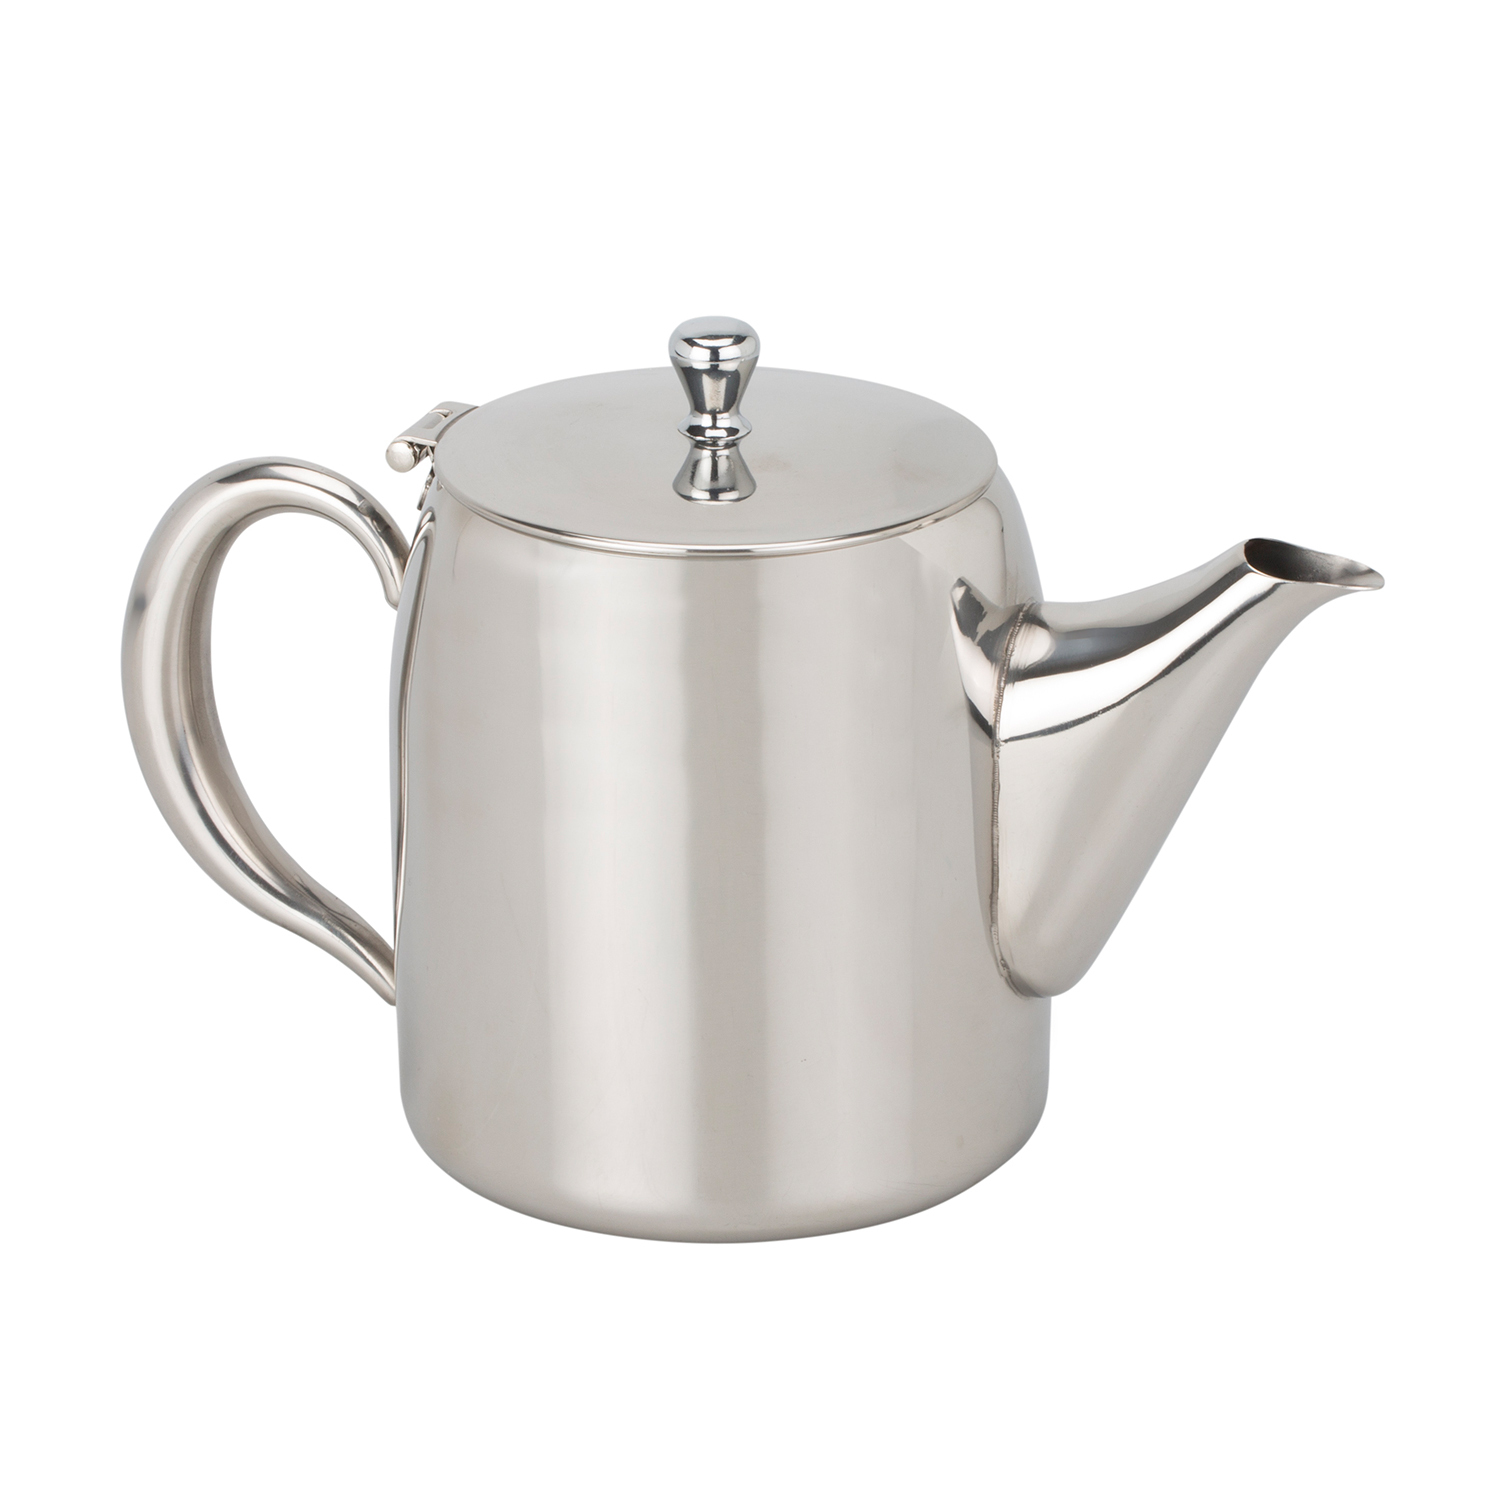 Stainless Steel Teapot 1.5L Image